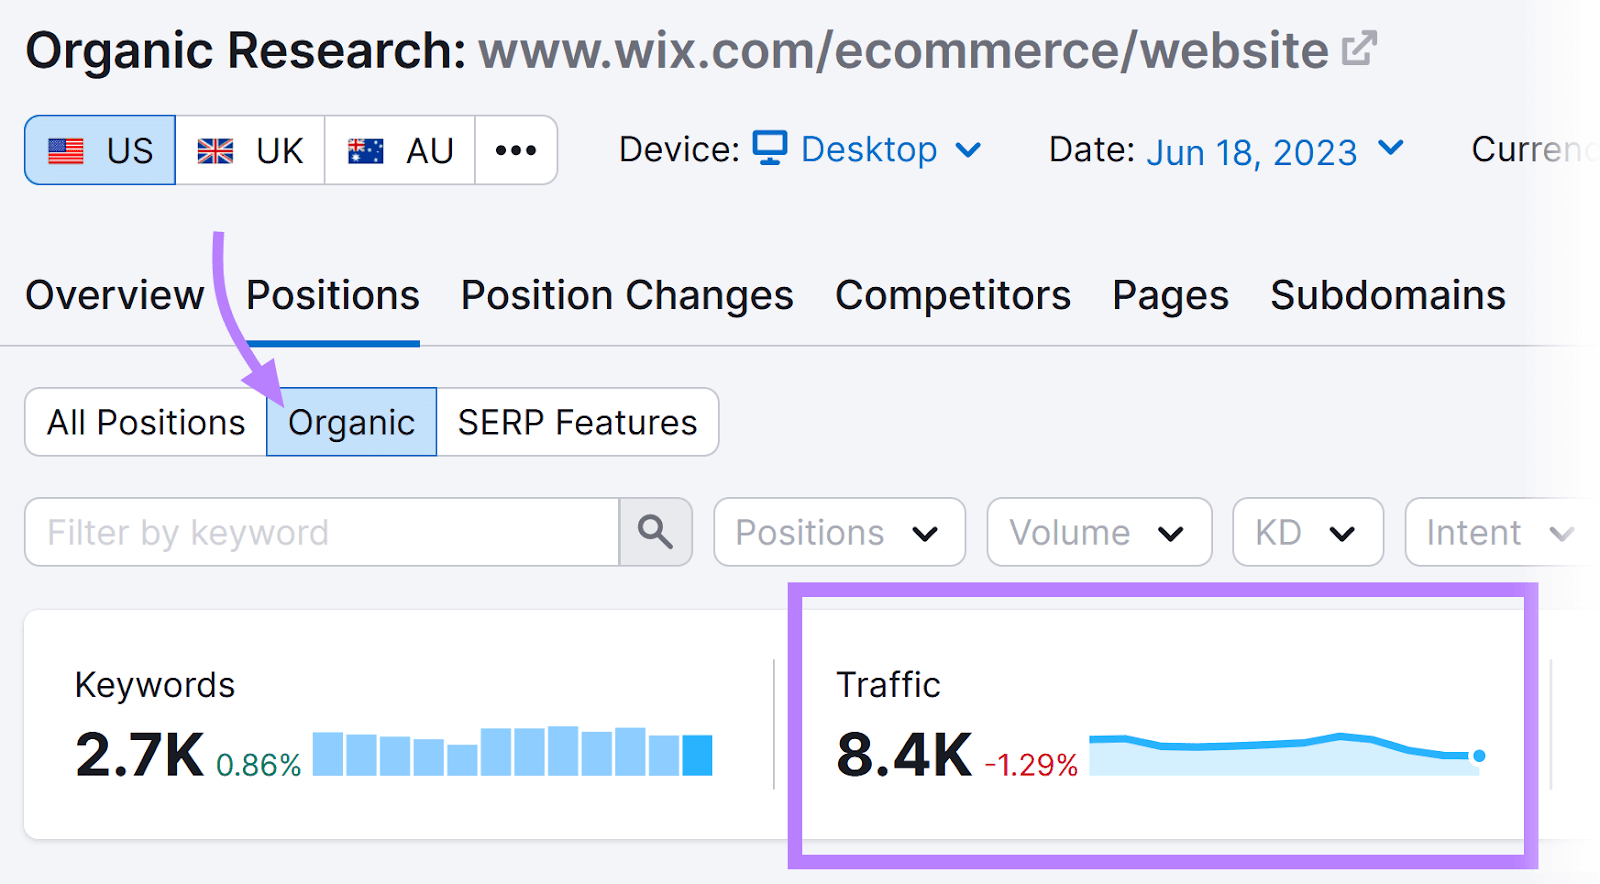 Organic Research tool shows 8.4K in traffic metric for Wix page